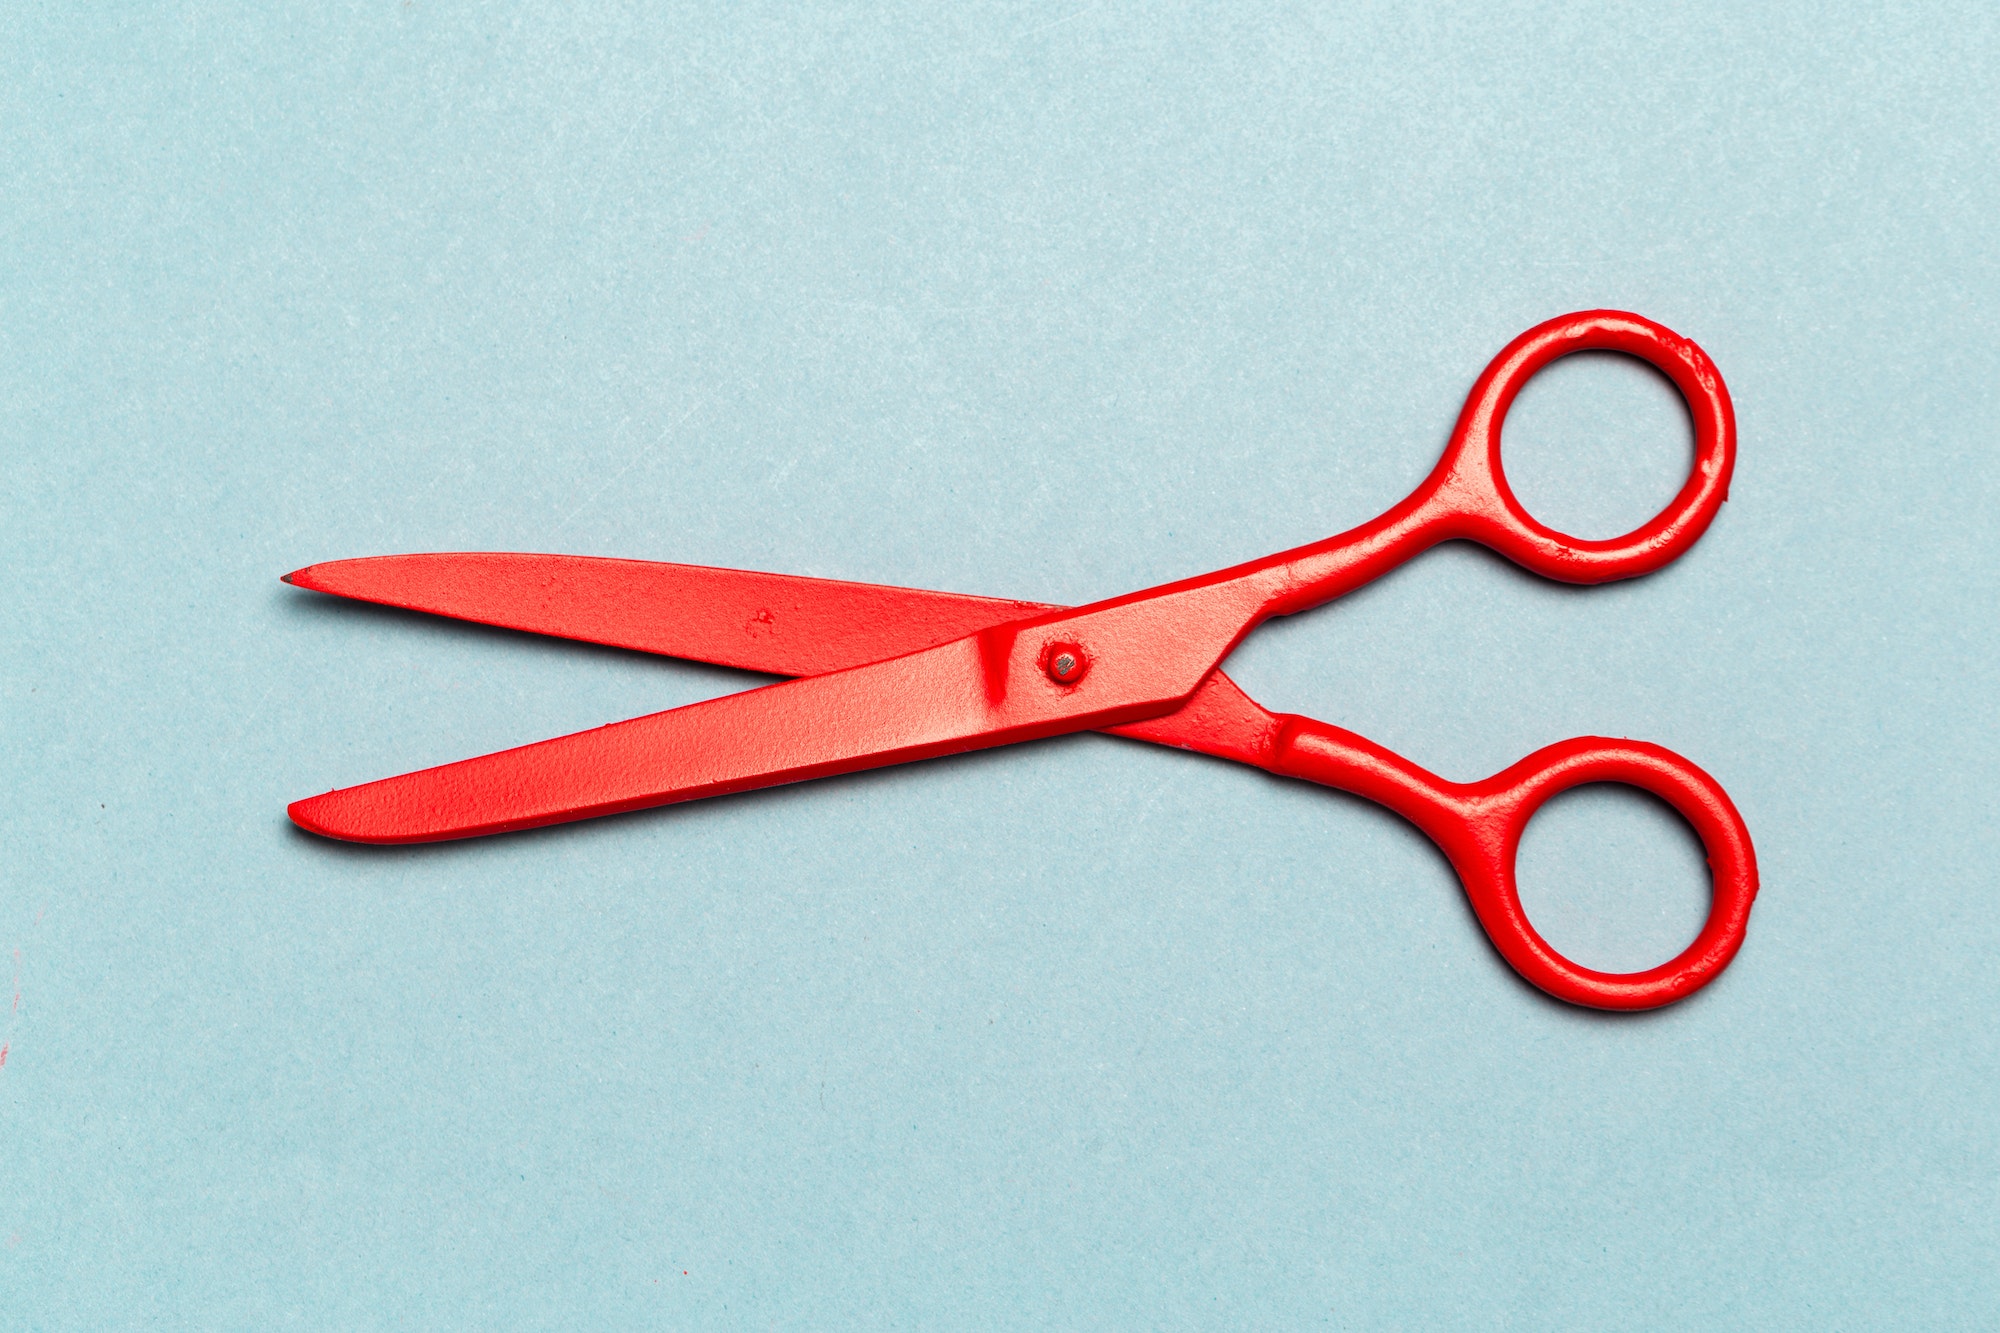 Red scissors on light blue background close up